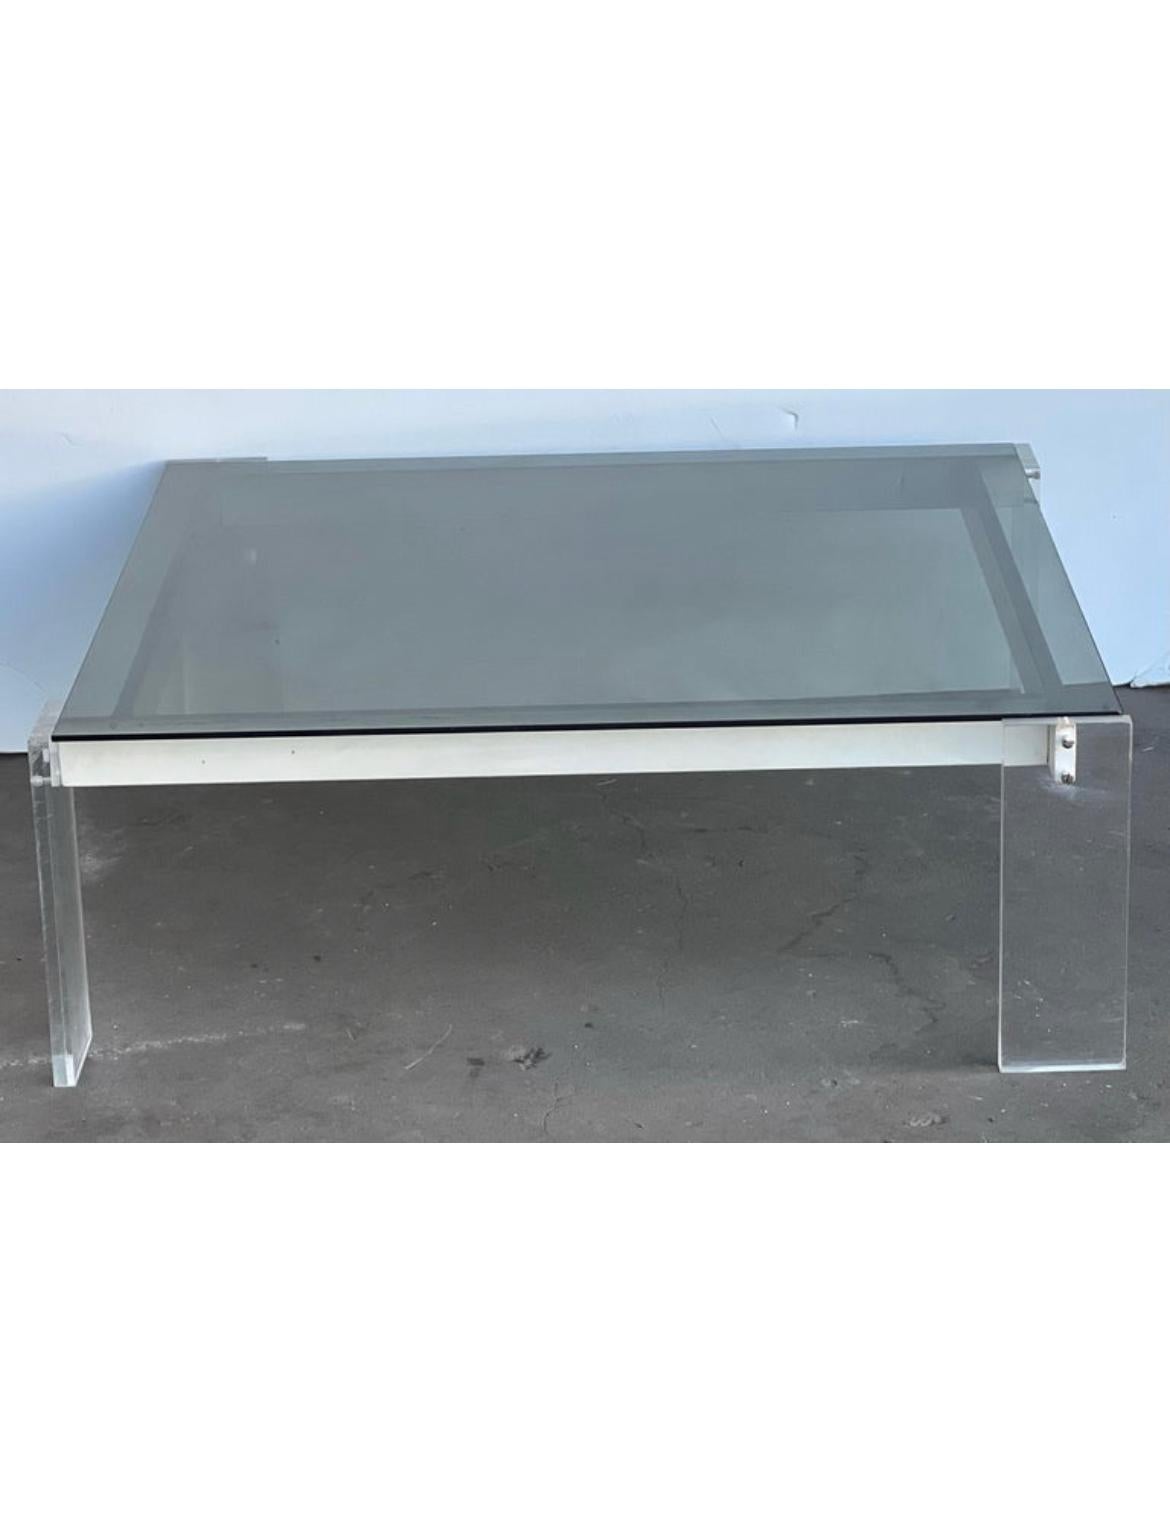 Here is a really unique imported Italian Lucite and glass Mid-Century Modern coffee table. The glass top lifts and can be removed to replace with something else if one chooses. There are 4 white sides that help support the glass top that features 4